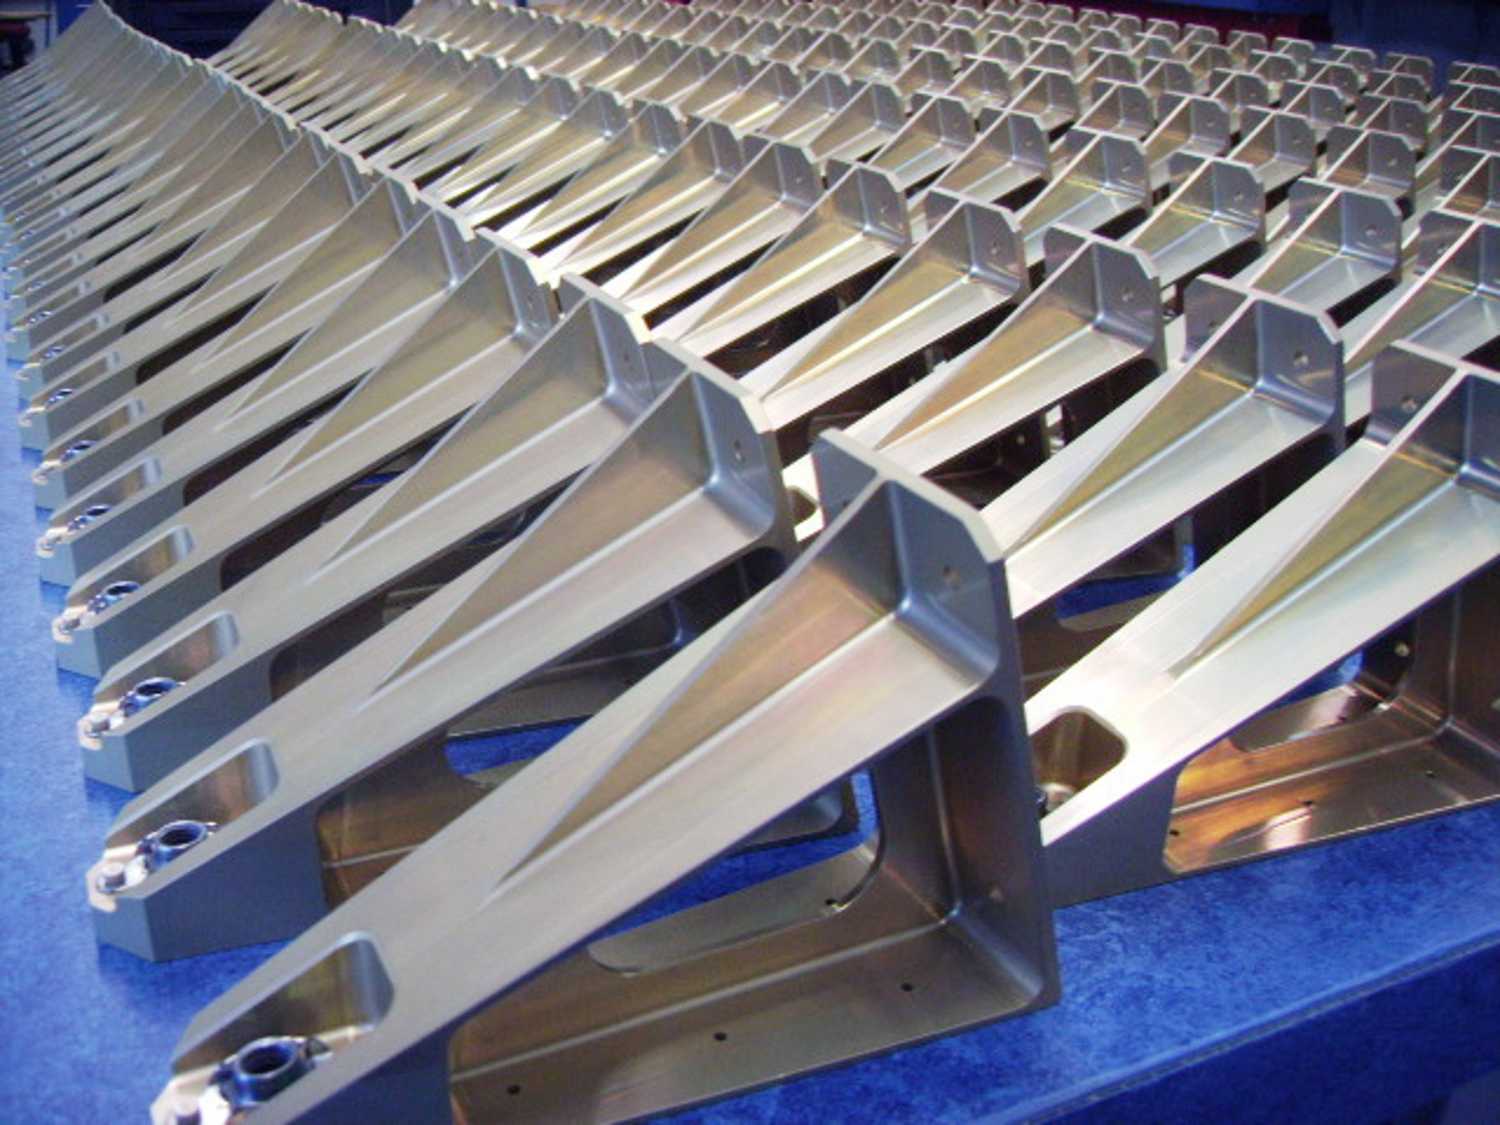 Series-produced base-brackets for the VEGA launch vehicle of ESA (European Space Agency). 